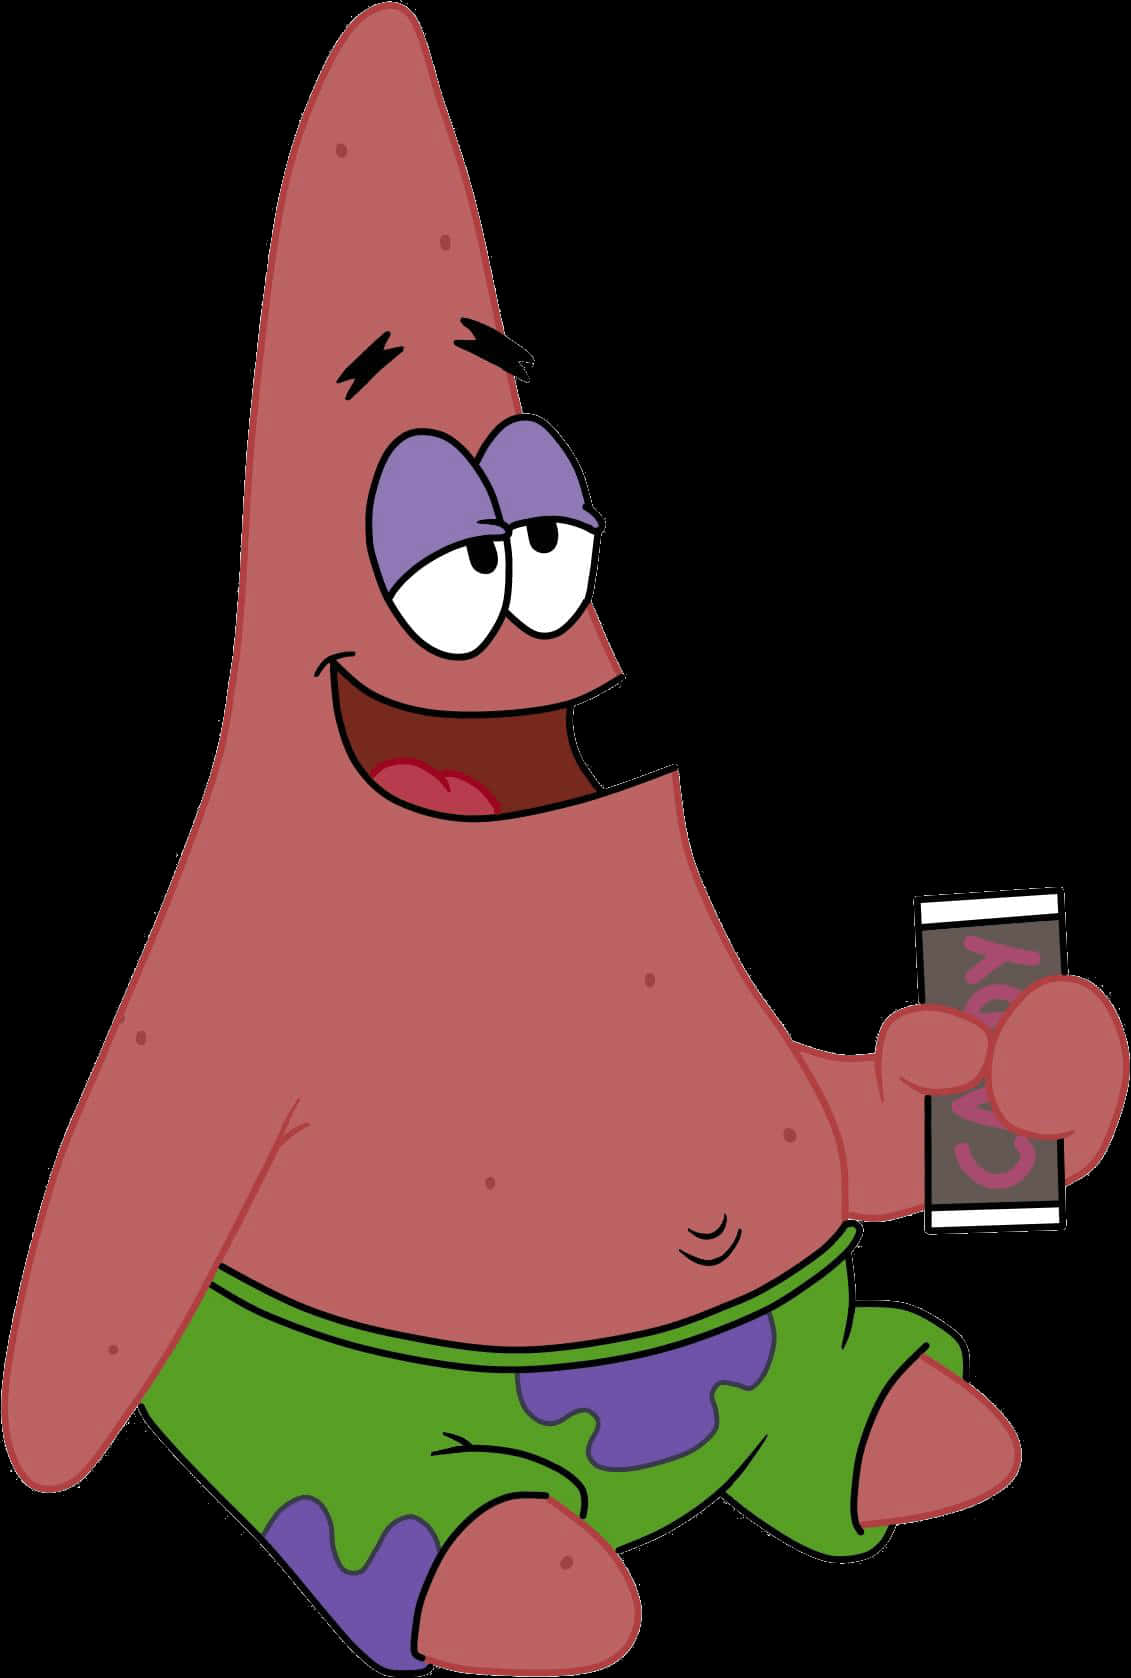 Patrick Star Holding Phone.png PNG